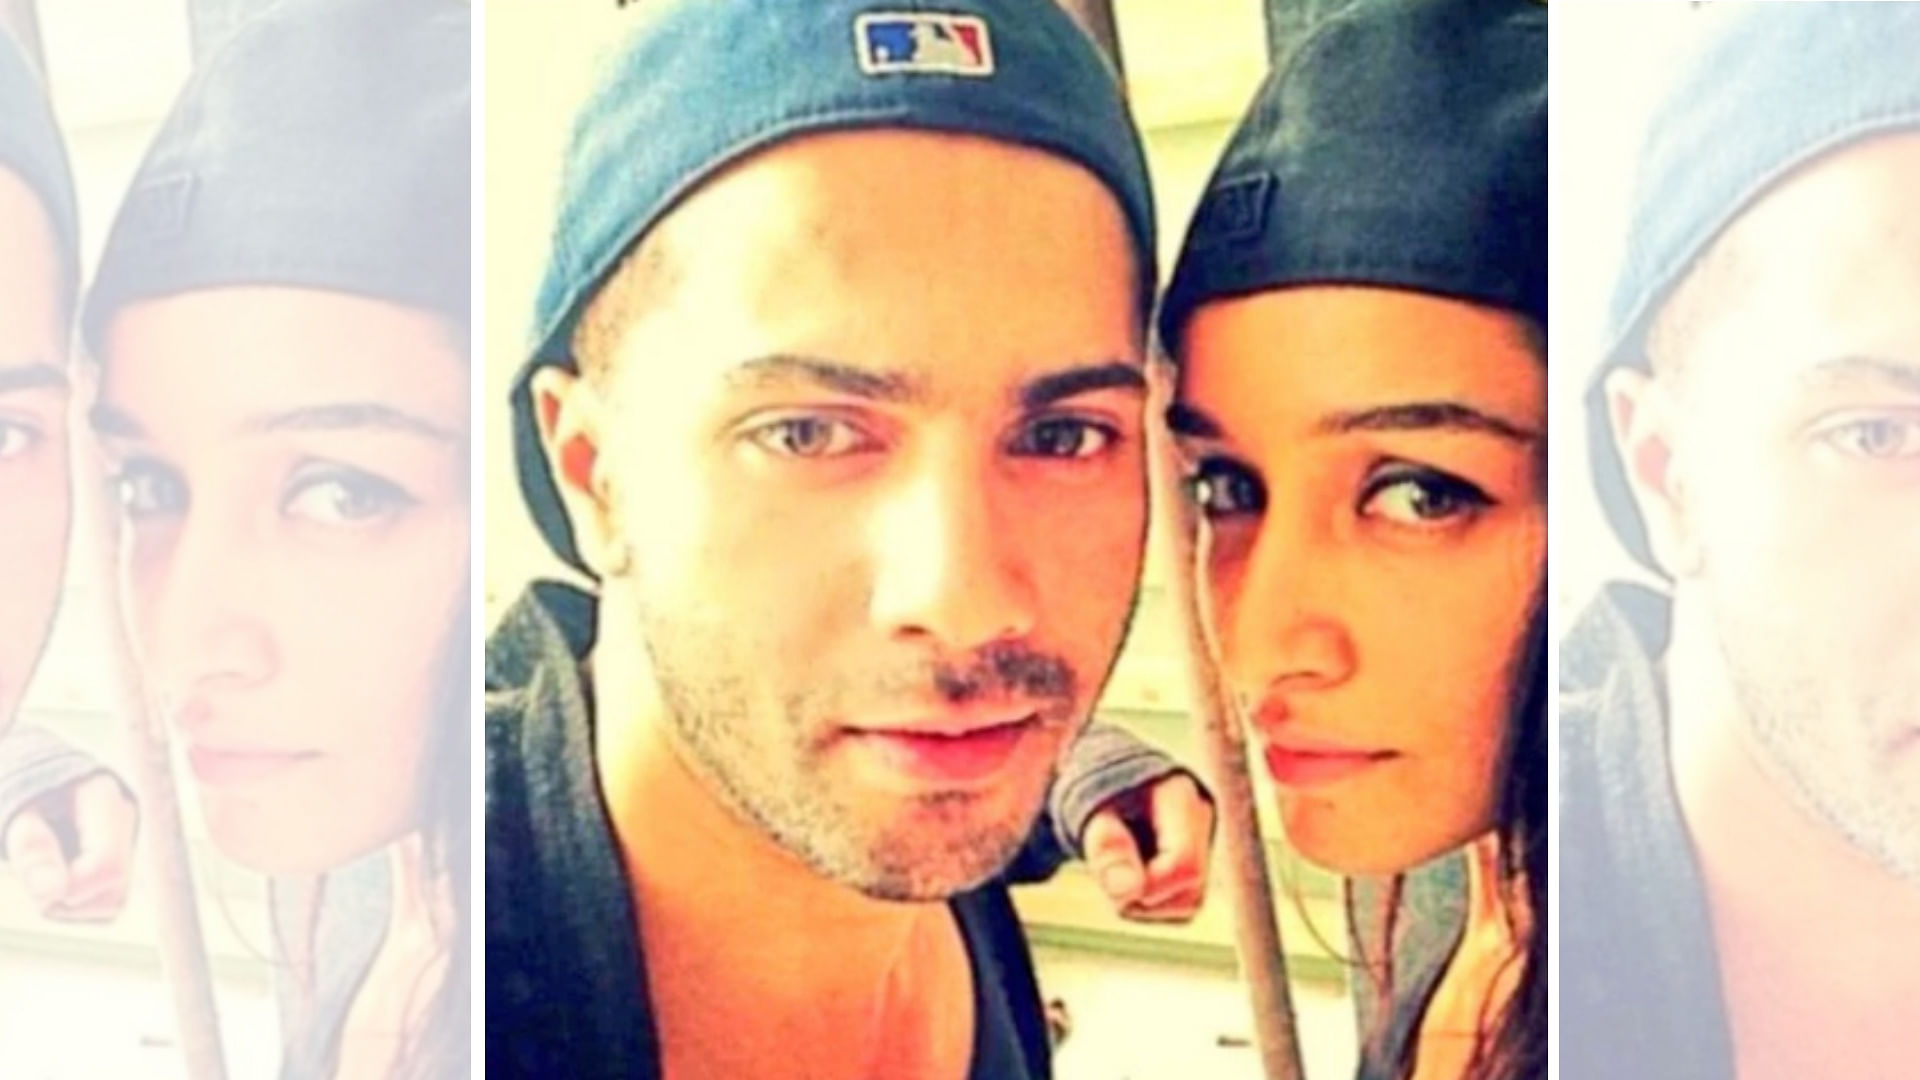 Varun Dhawan welcomed Shraddha Kapoor aboard a new project after they starred together in ABCD 2.